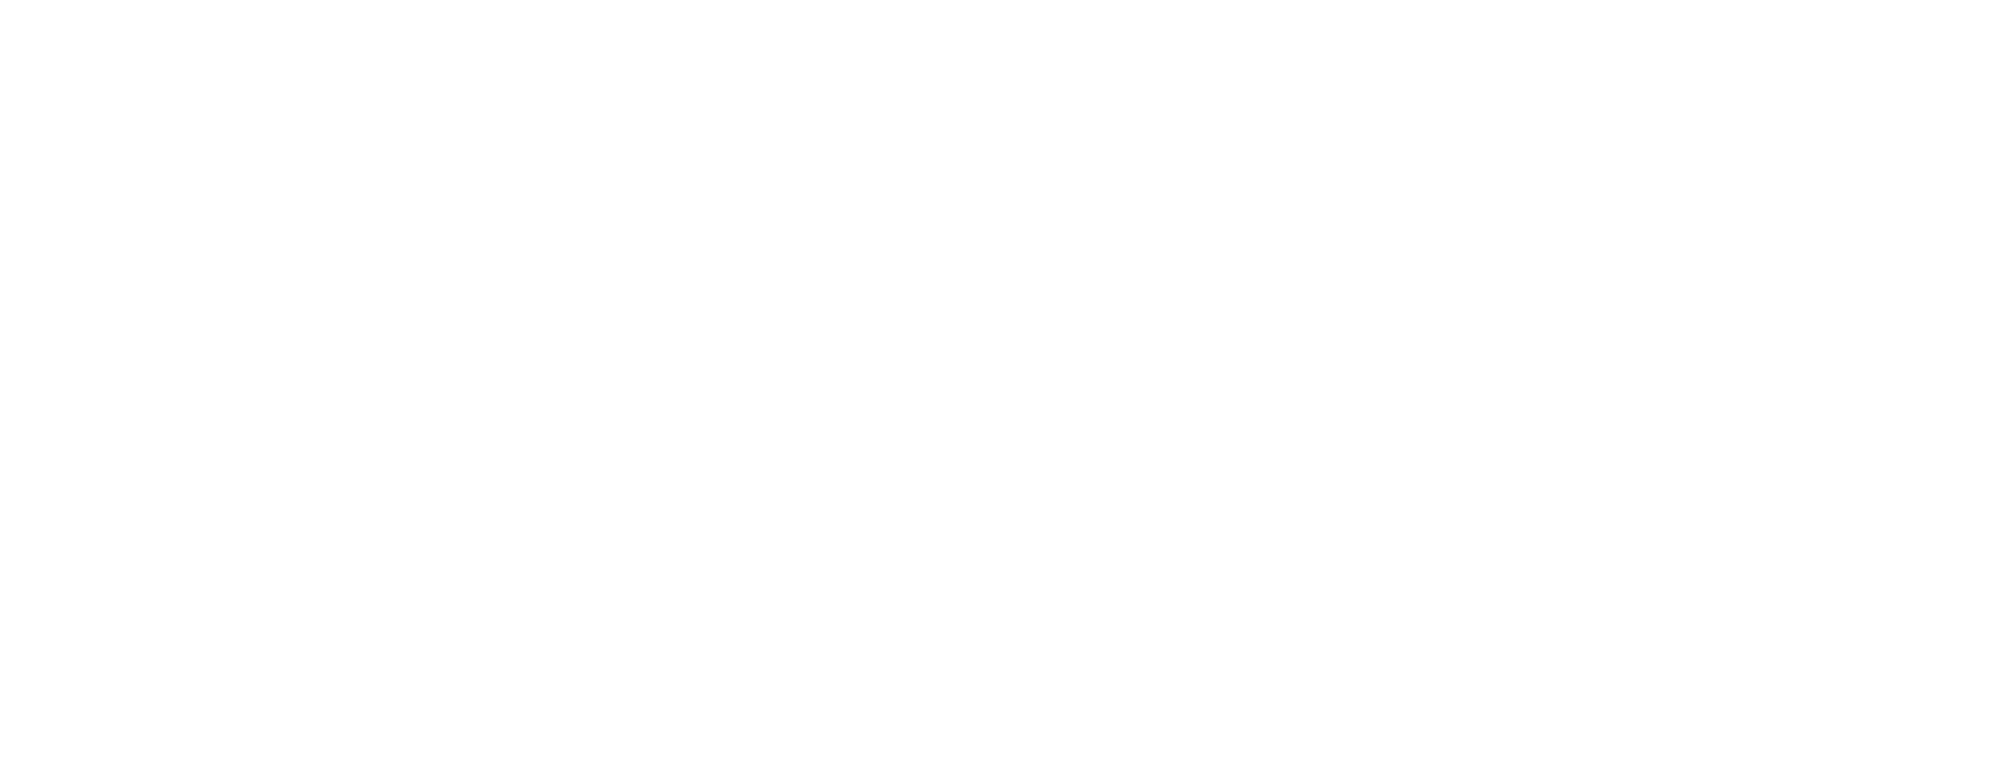 OpenFF Toolkit 0.10.0+75.g7b1a97f3.dirty documentation logo